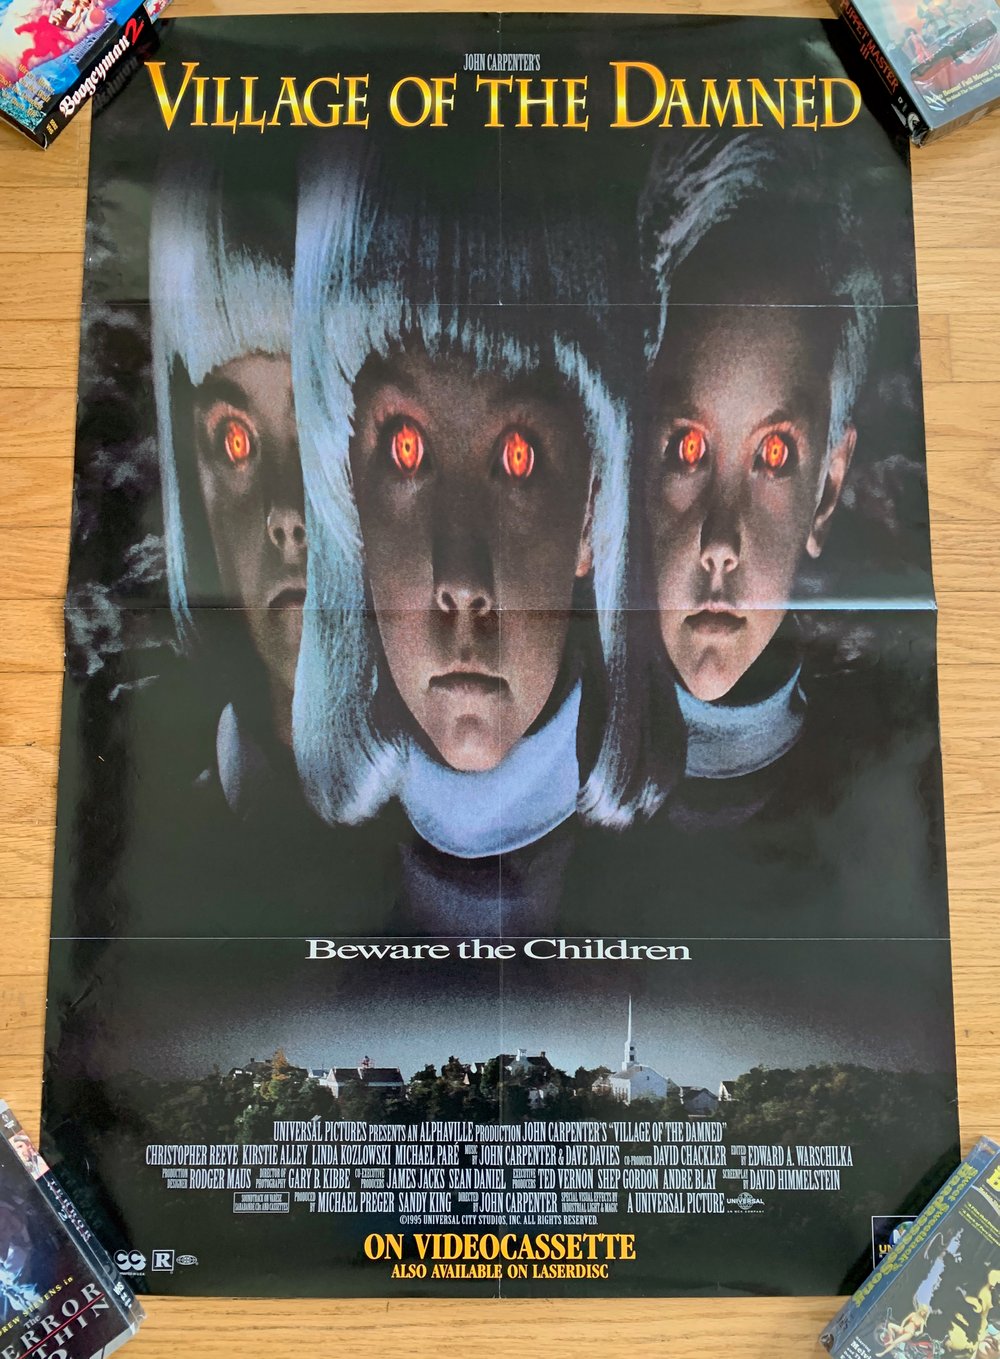 1995 VILLAGE OF THE DAMNED Original Universal Home Video Promotional Movie Poster